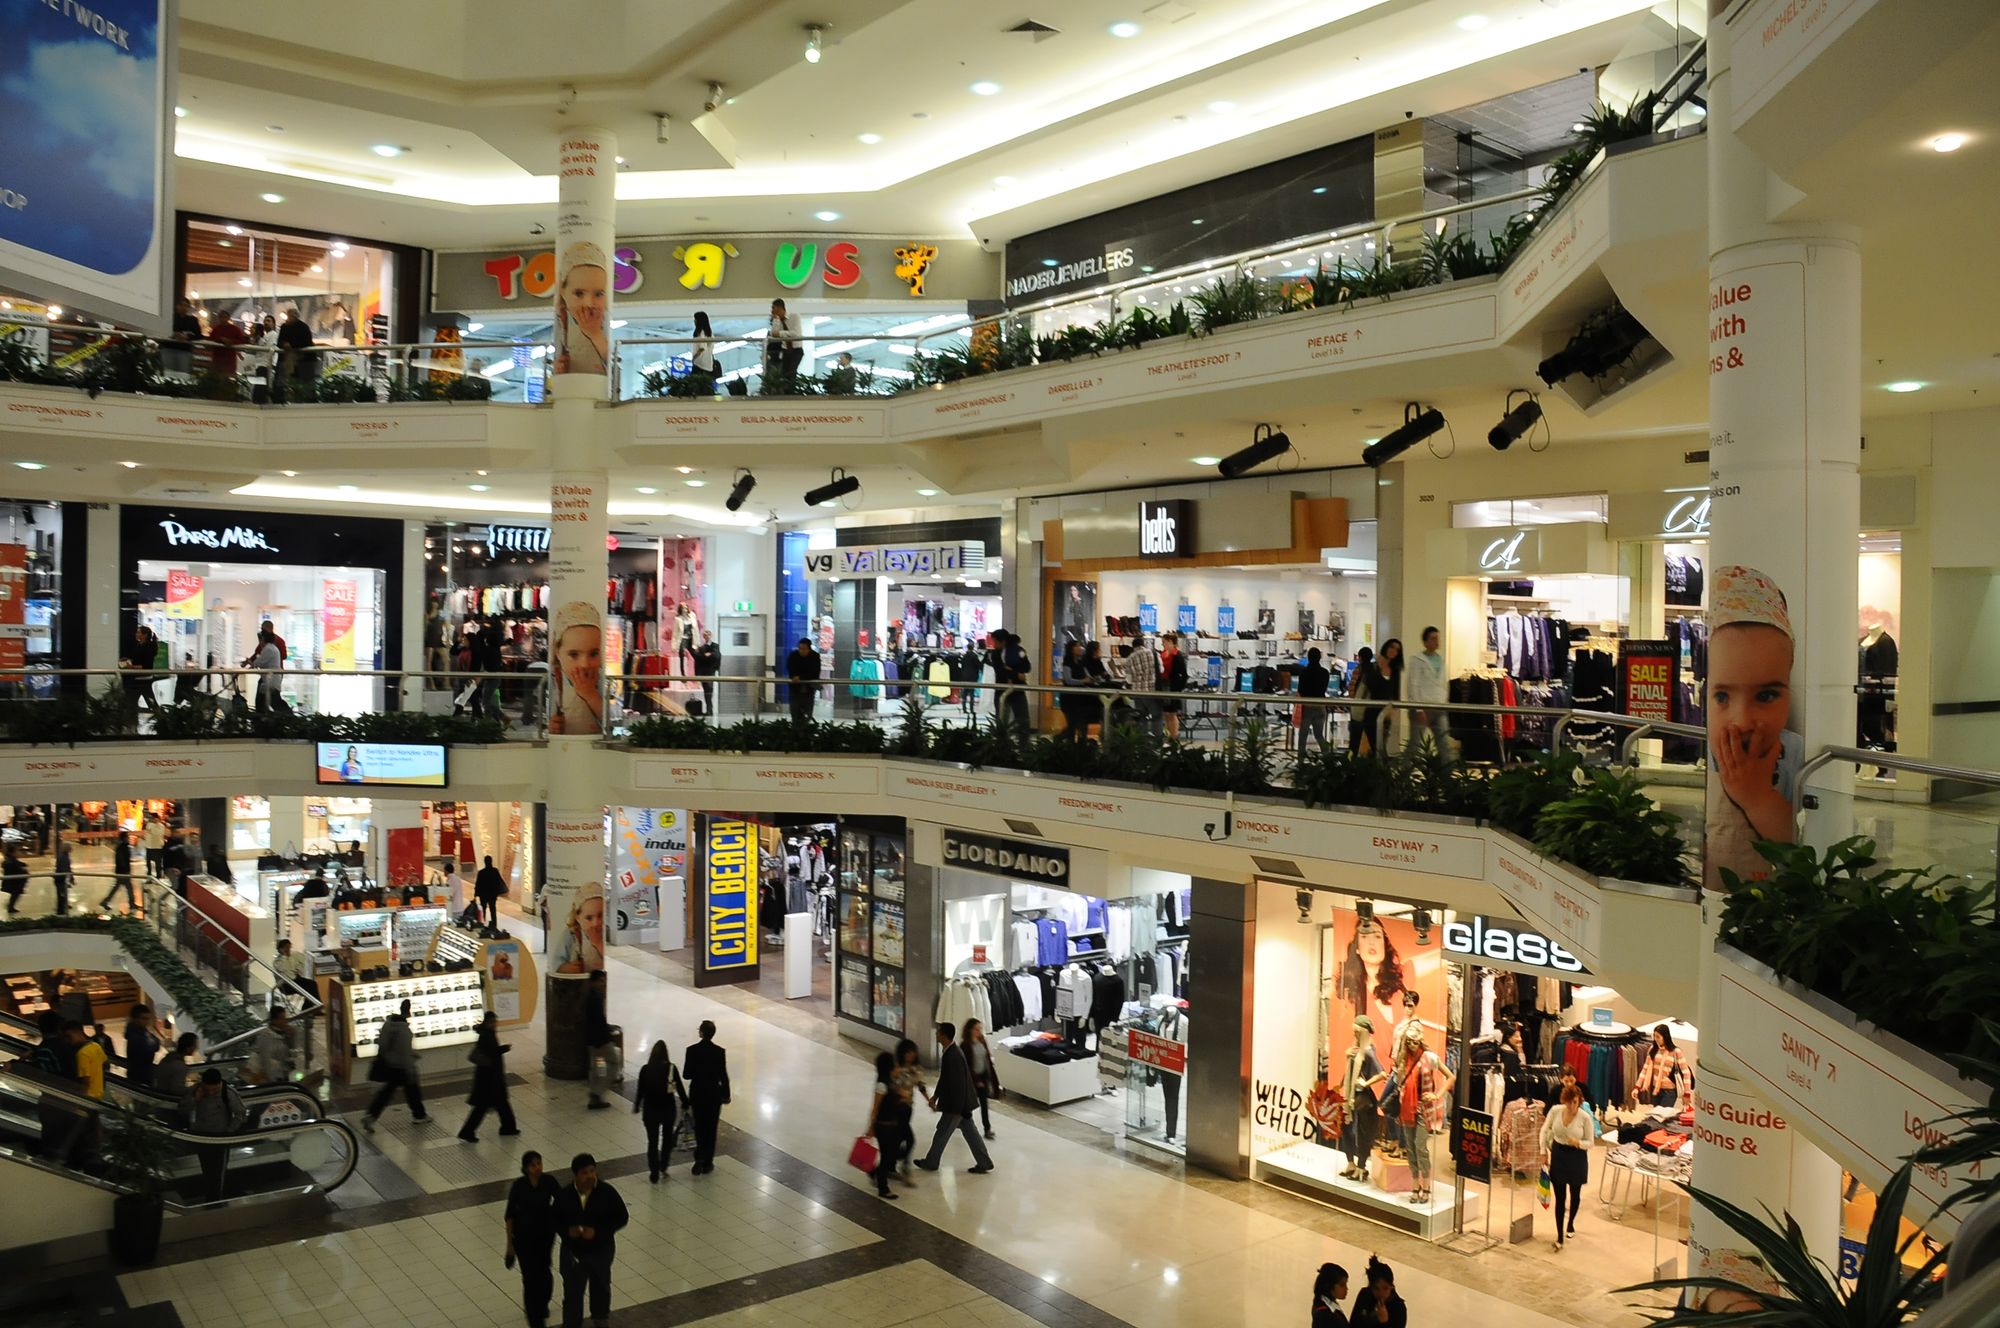 Retail properties that largely target the mass affluent customers